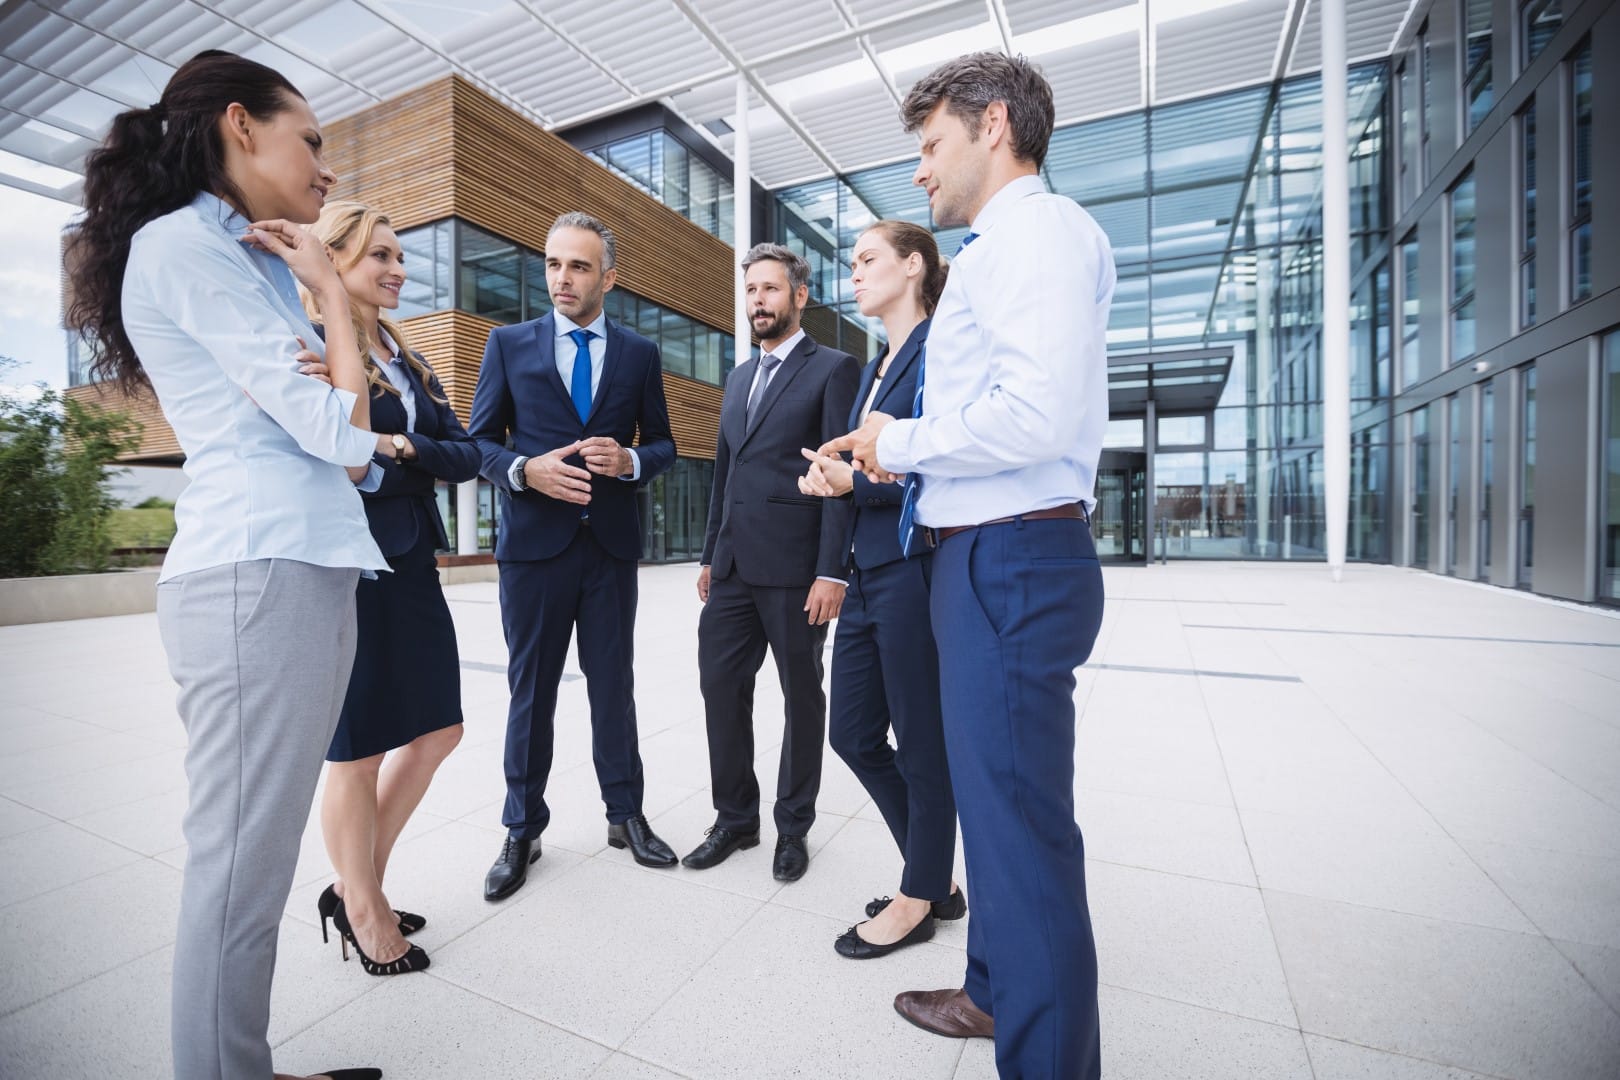 Group of businesspeople interacting outside office building